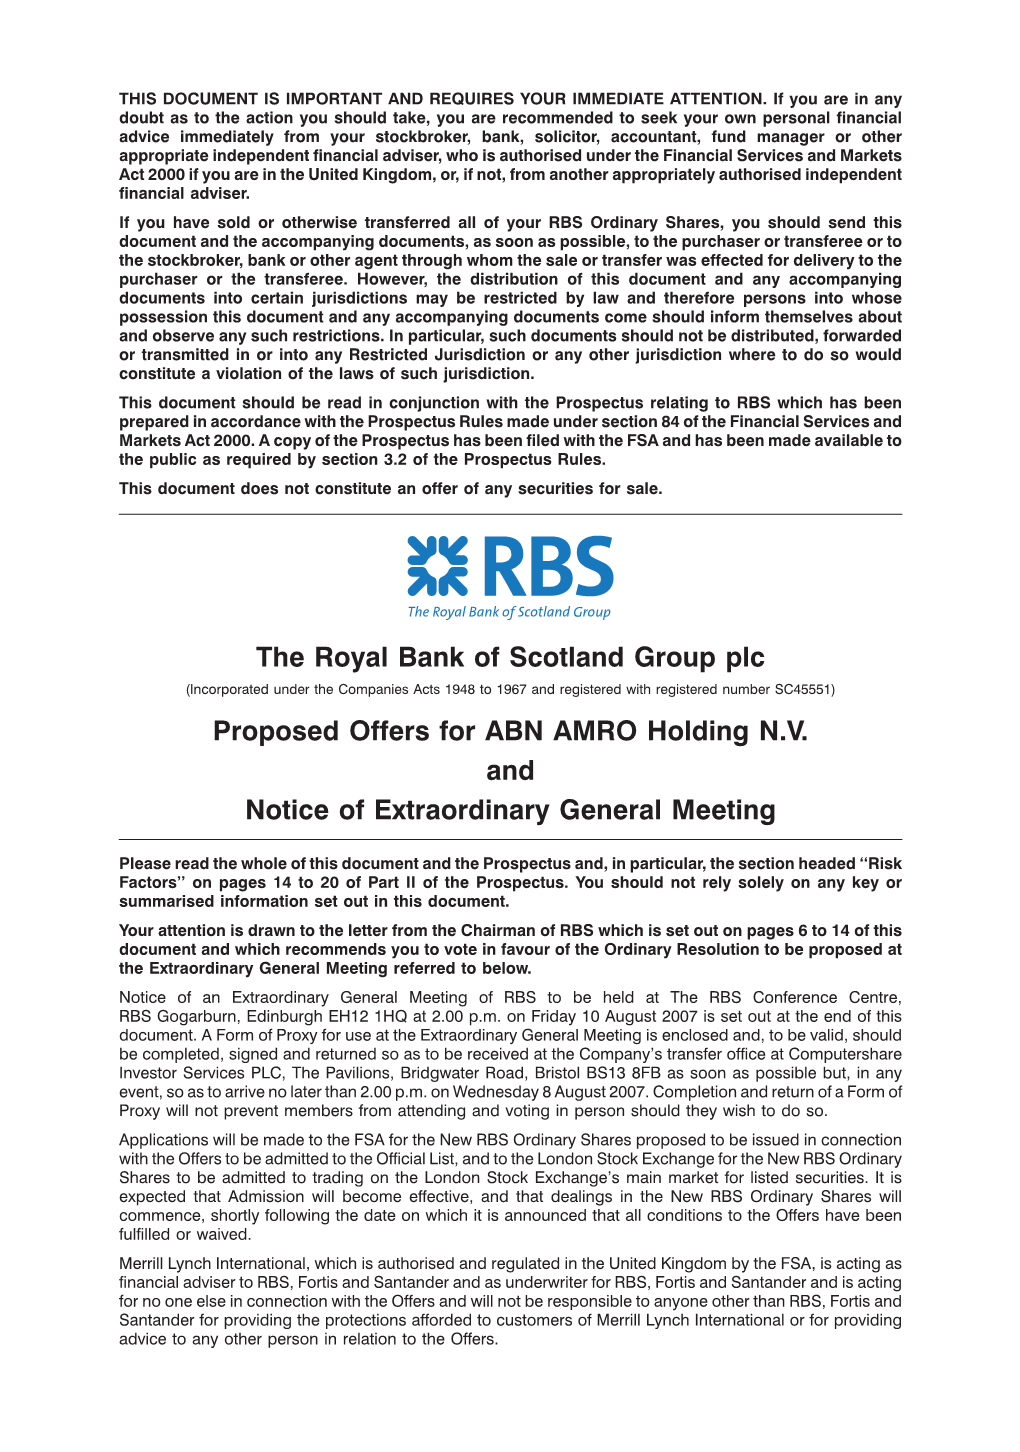 The Royal Bank of Scotland Group Plc Proposed Offers for ABN AMRO Holding N.V. and Notice of Extraordinary General Meeting